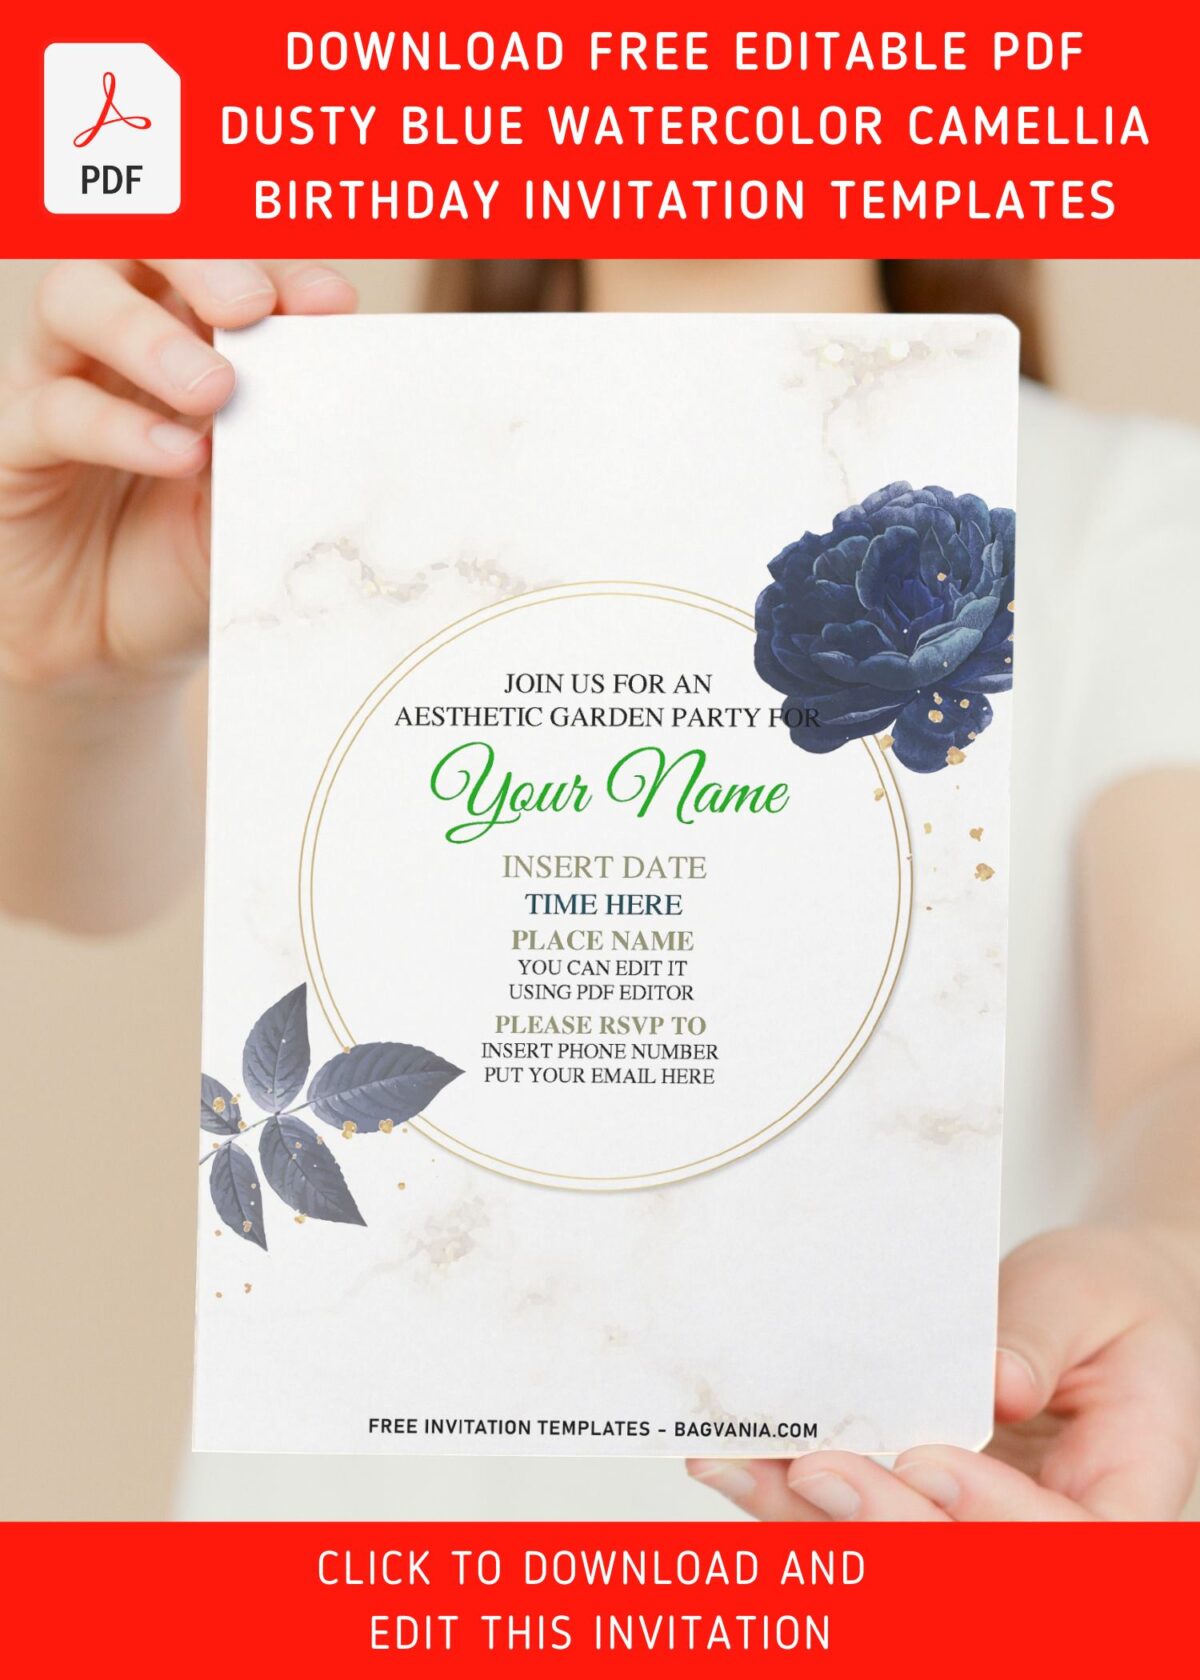 (Free Editable PDF) Dusty Marble Camellia And Miller Birthday Invitation Templates with editable text